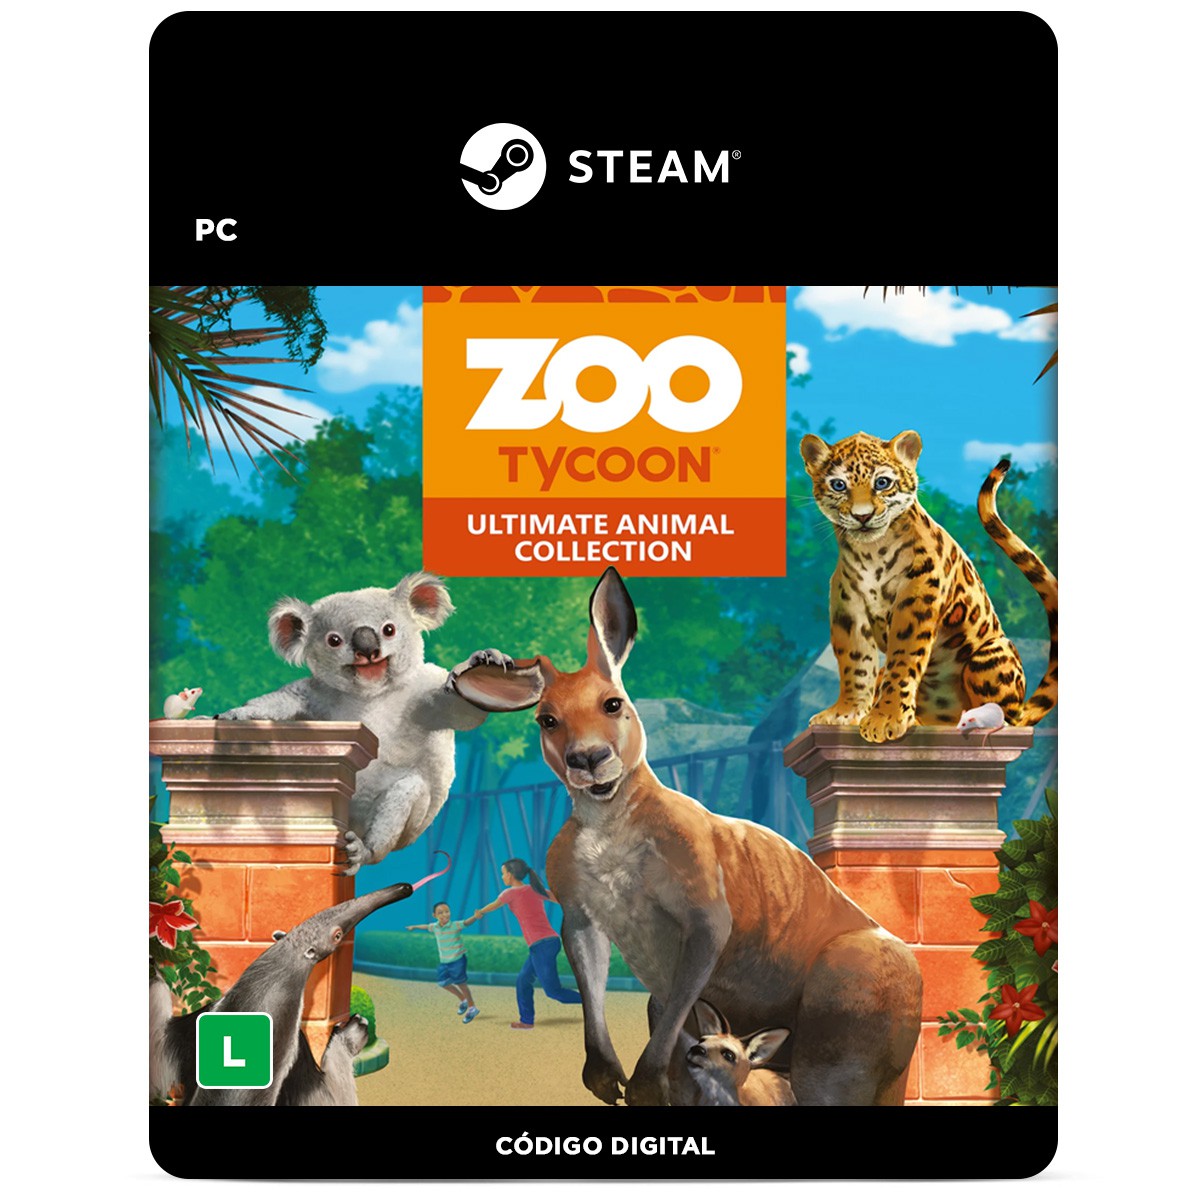 Ever Wonder How Much Zoo Tycoon 2: Mobile Was? : r/ZooTycoon